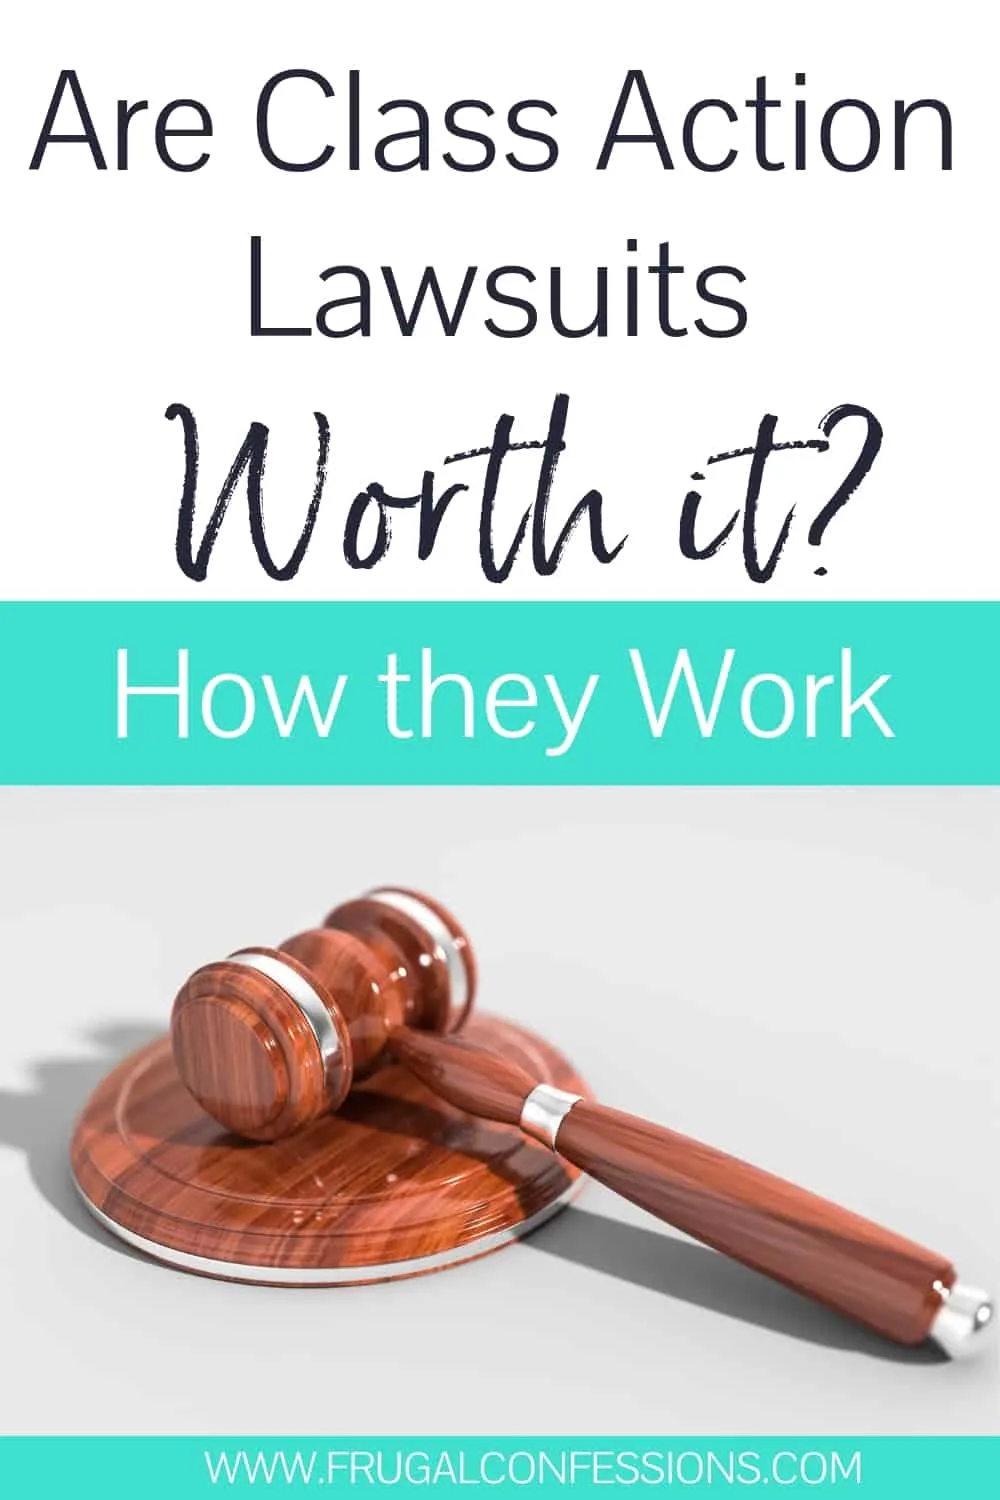 Class Action Lawsuit Examples (Are Class Action Lawsuits Worth it?)